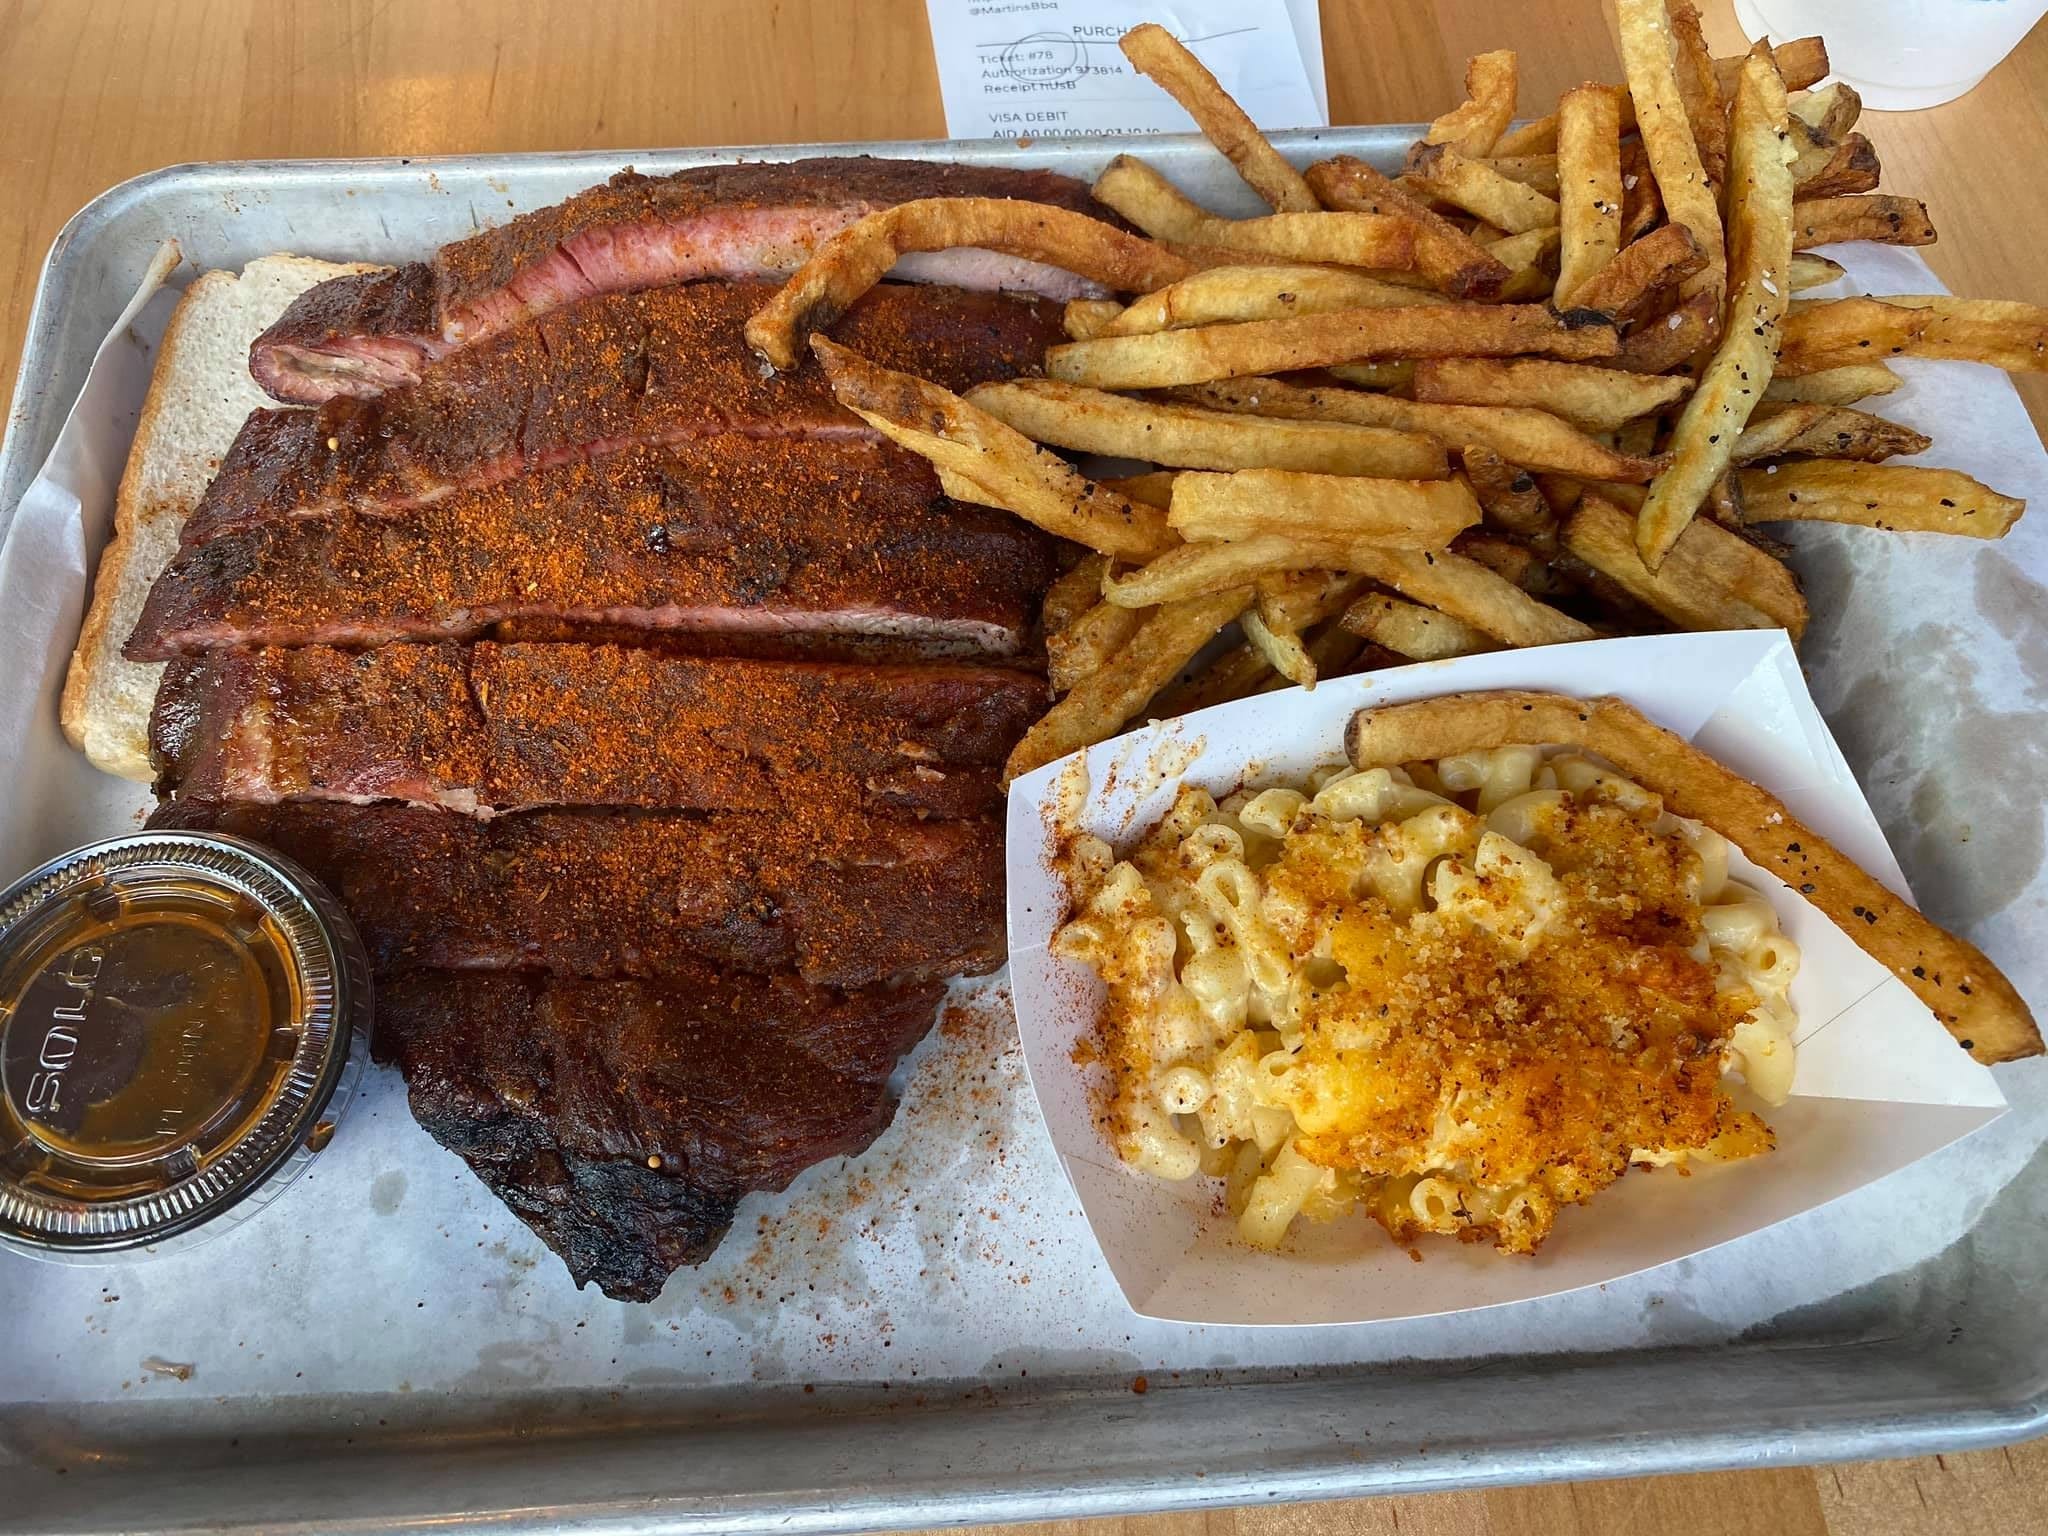 An order of ribs, french fries and mac n cheese from Martin's BBQ